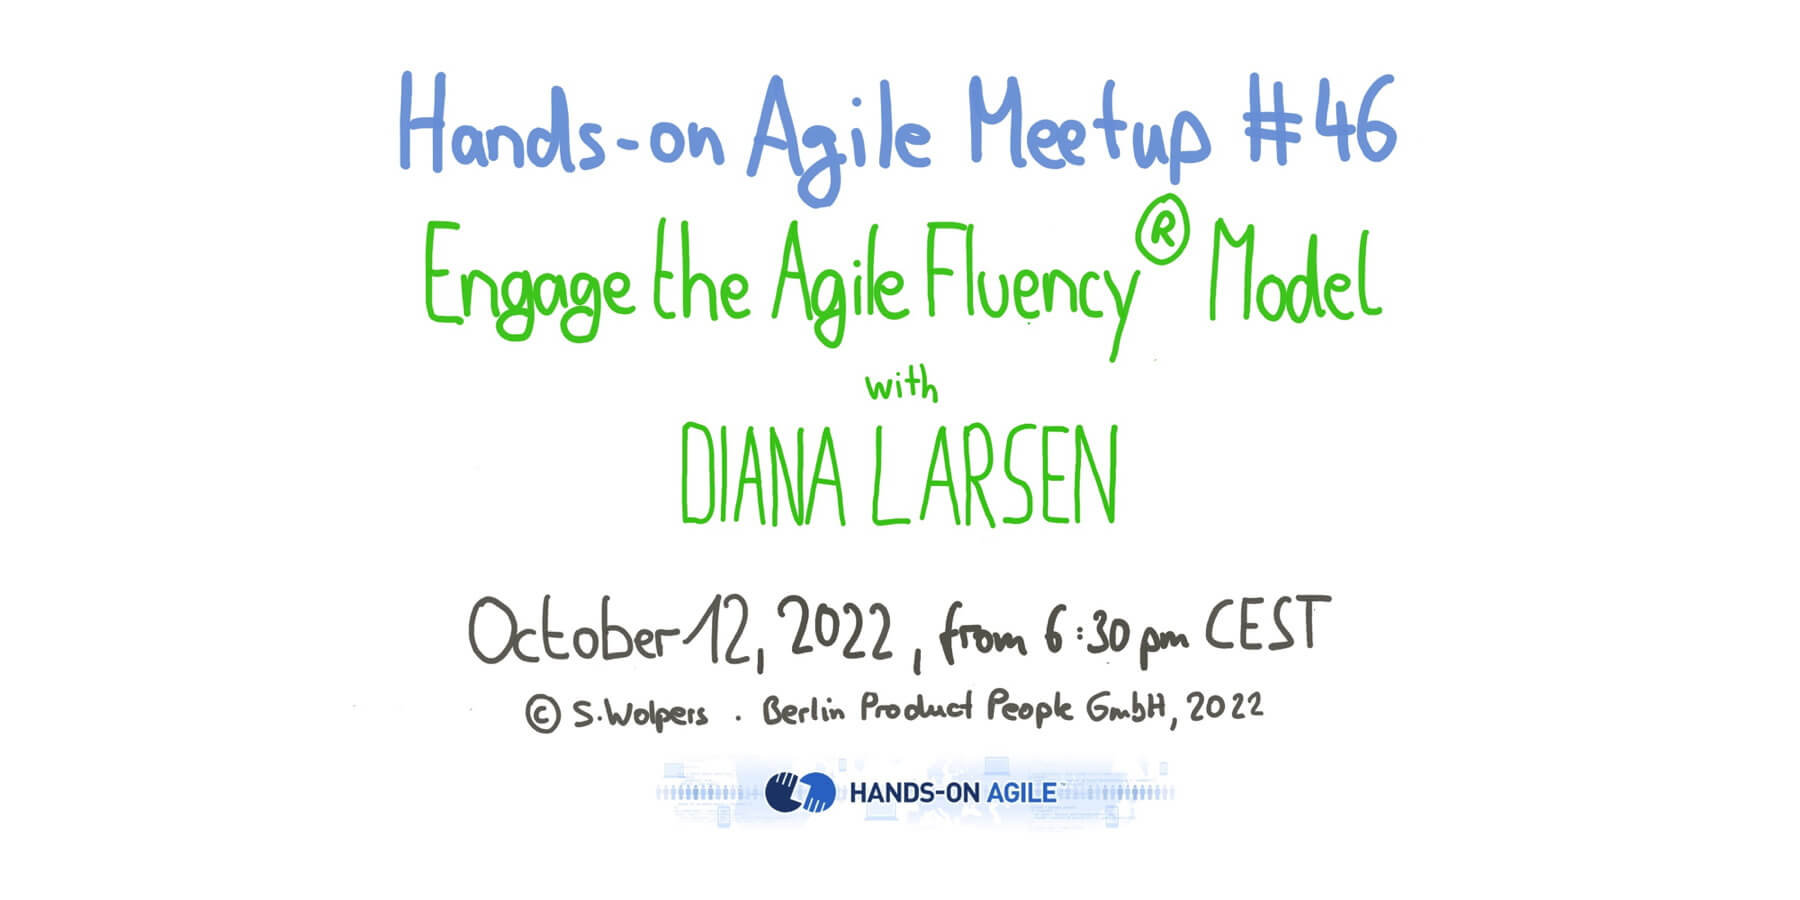 Hands-on Agile #46: Engage the Agile Fluency® Model mit Diana Larsen am 12. Oktober 2022 — Berlin Product People GmbH